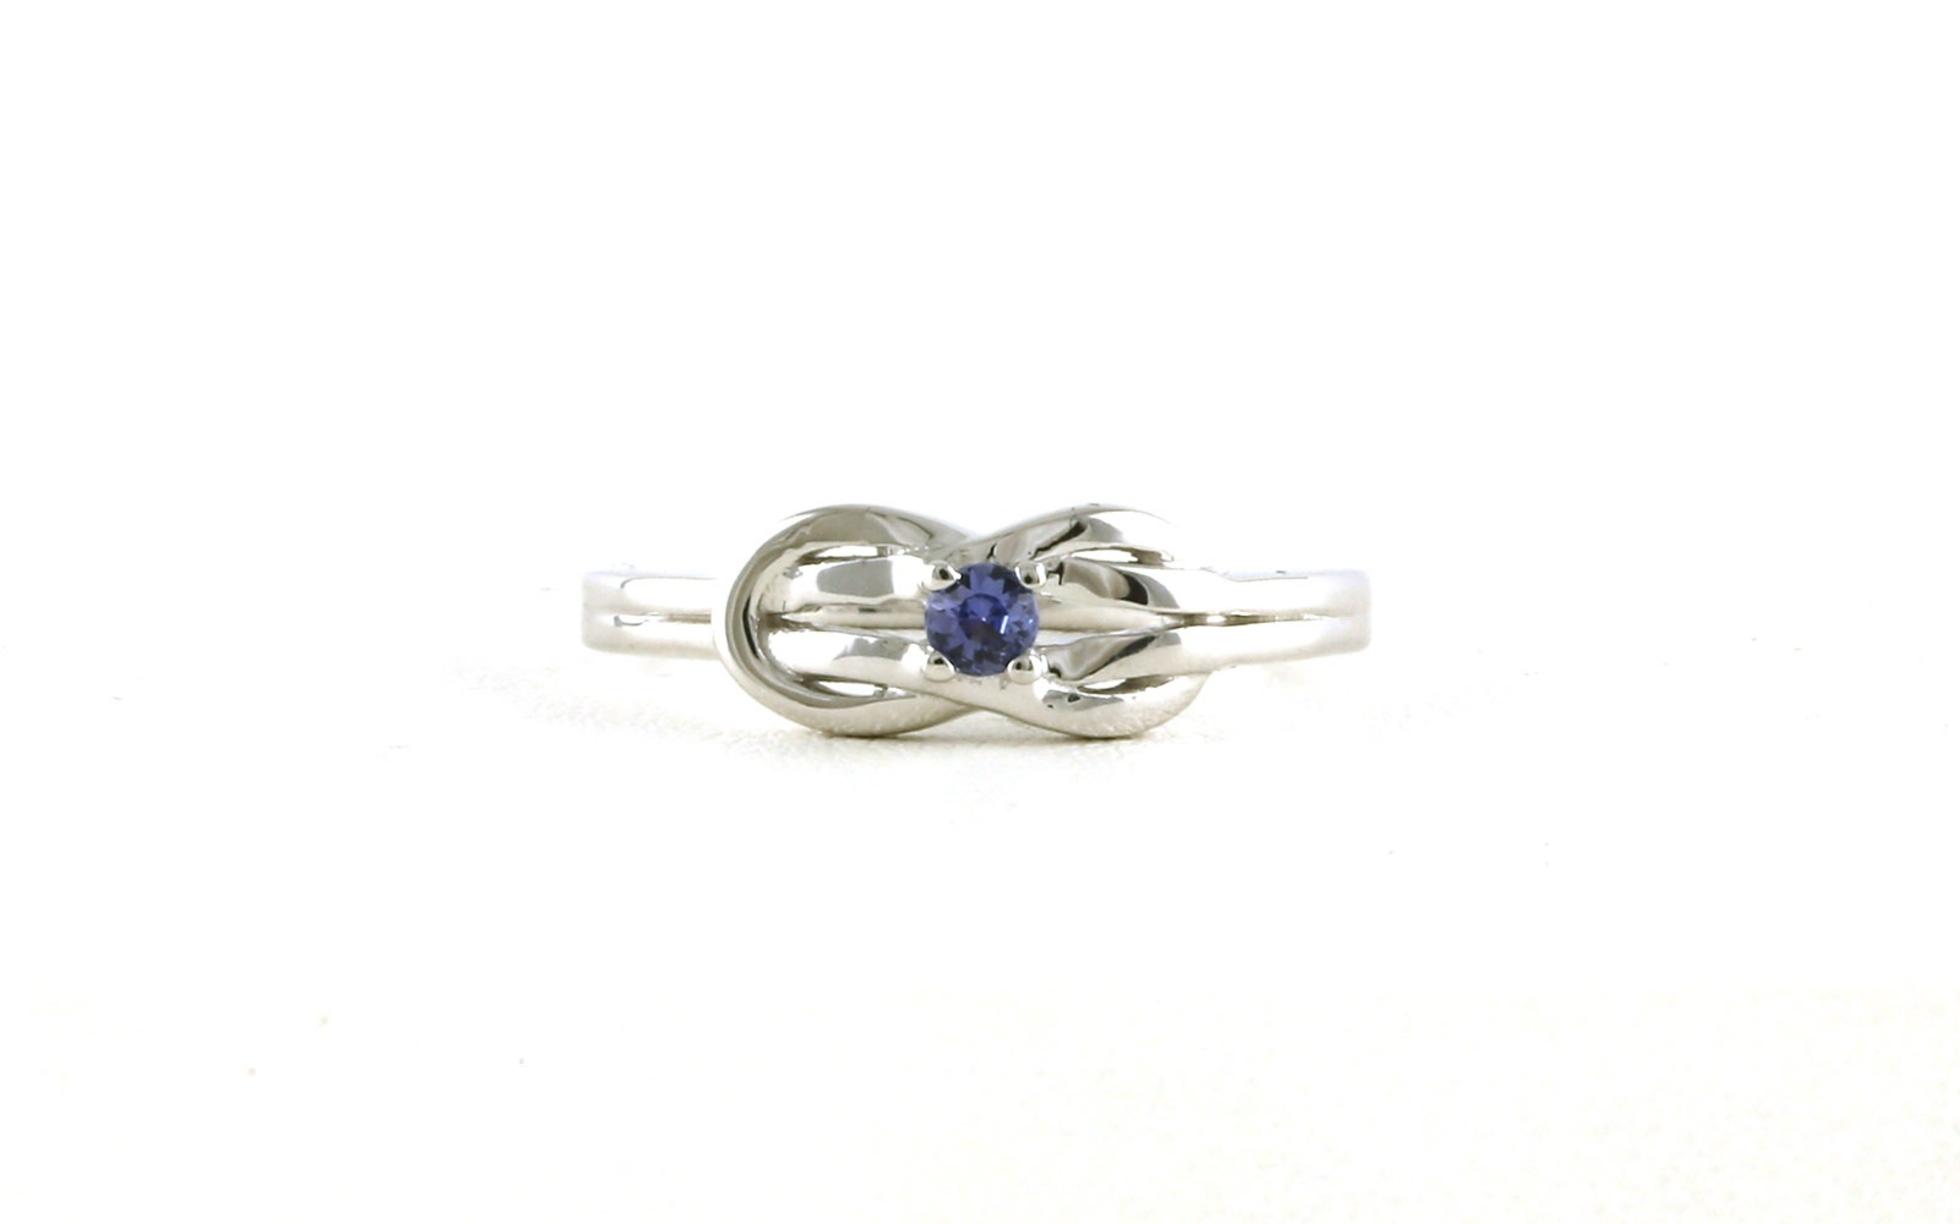 Solitaire-style Knot Knot Montana Yogo Sapphire Ring in Sterling Silver (0.04cts)